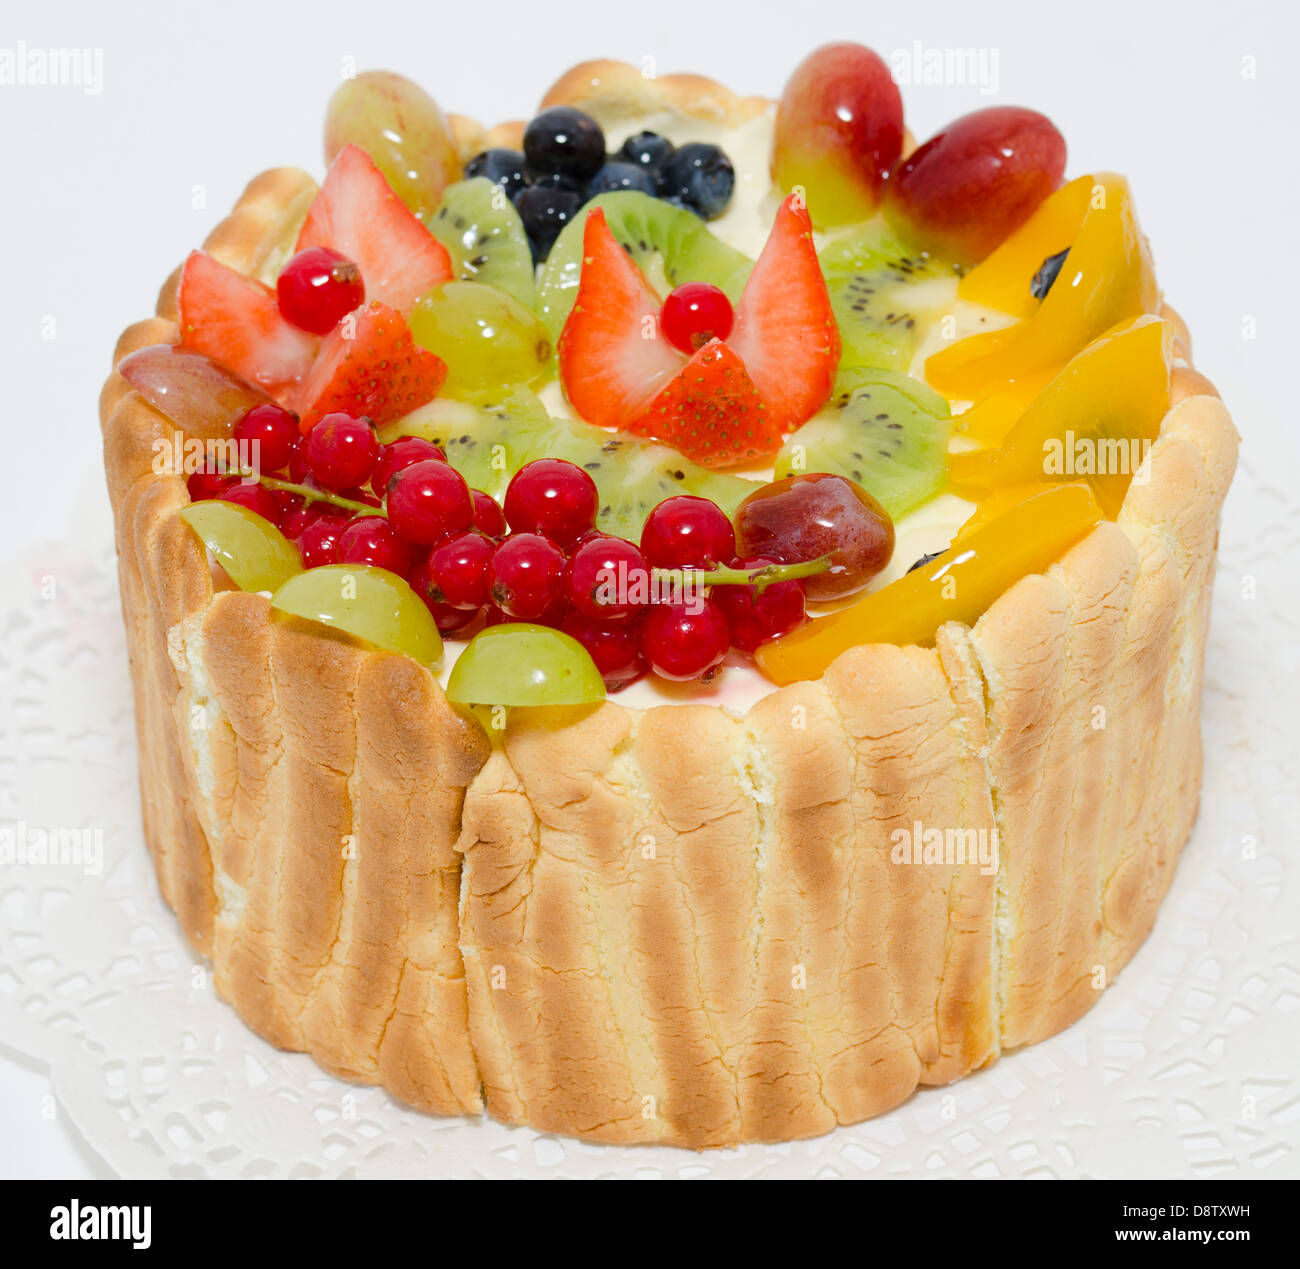 fruit and berry cake Stock Photo